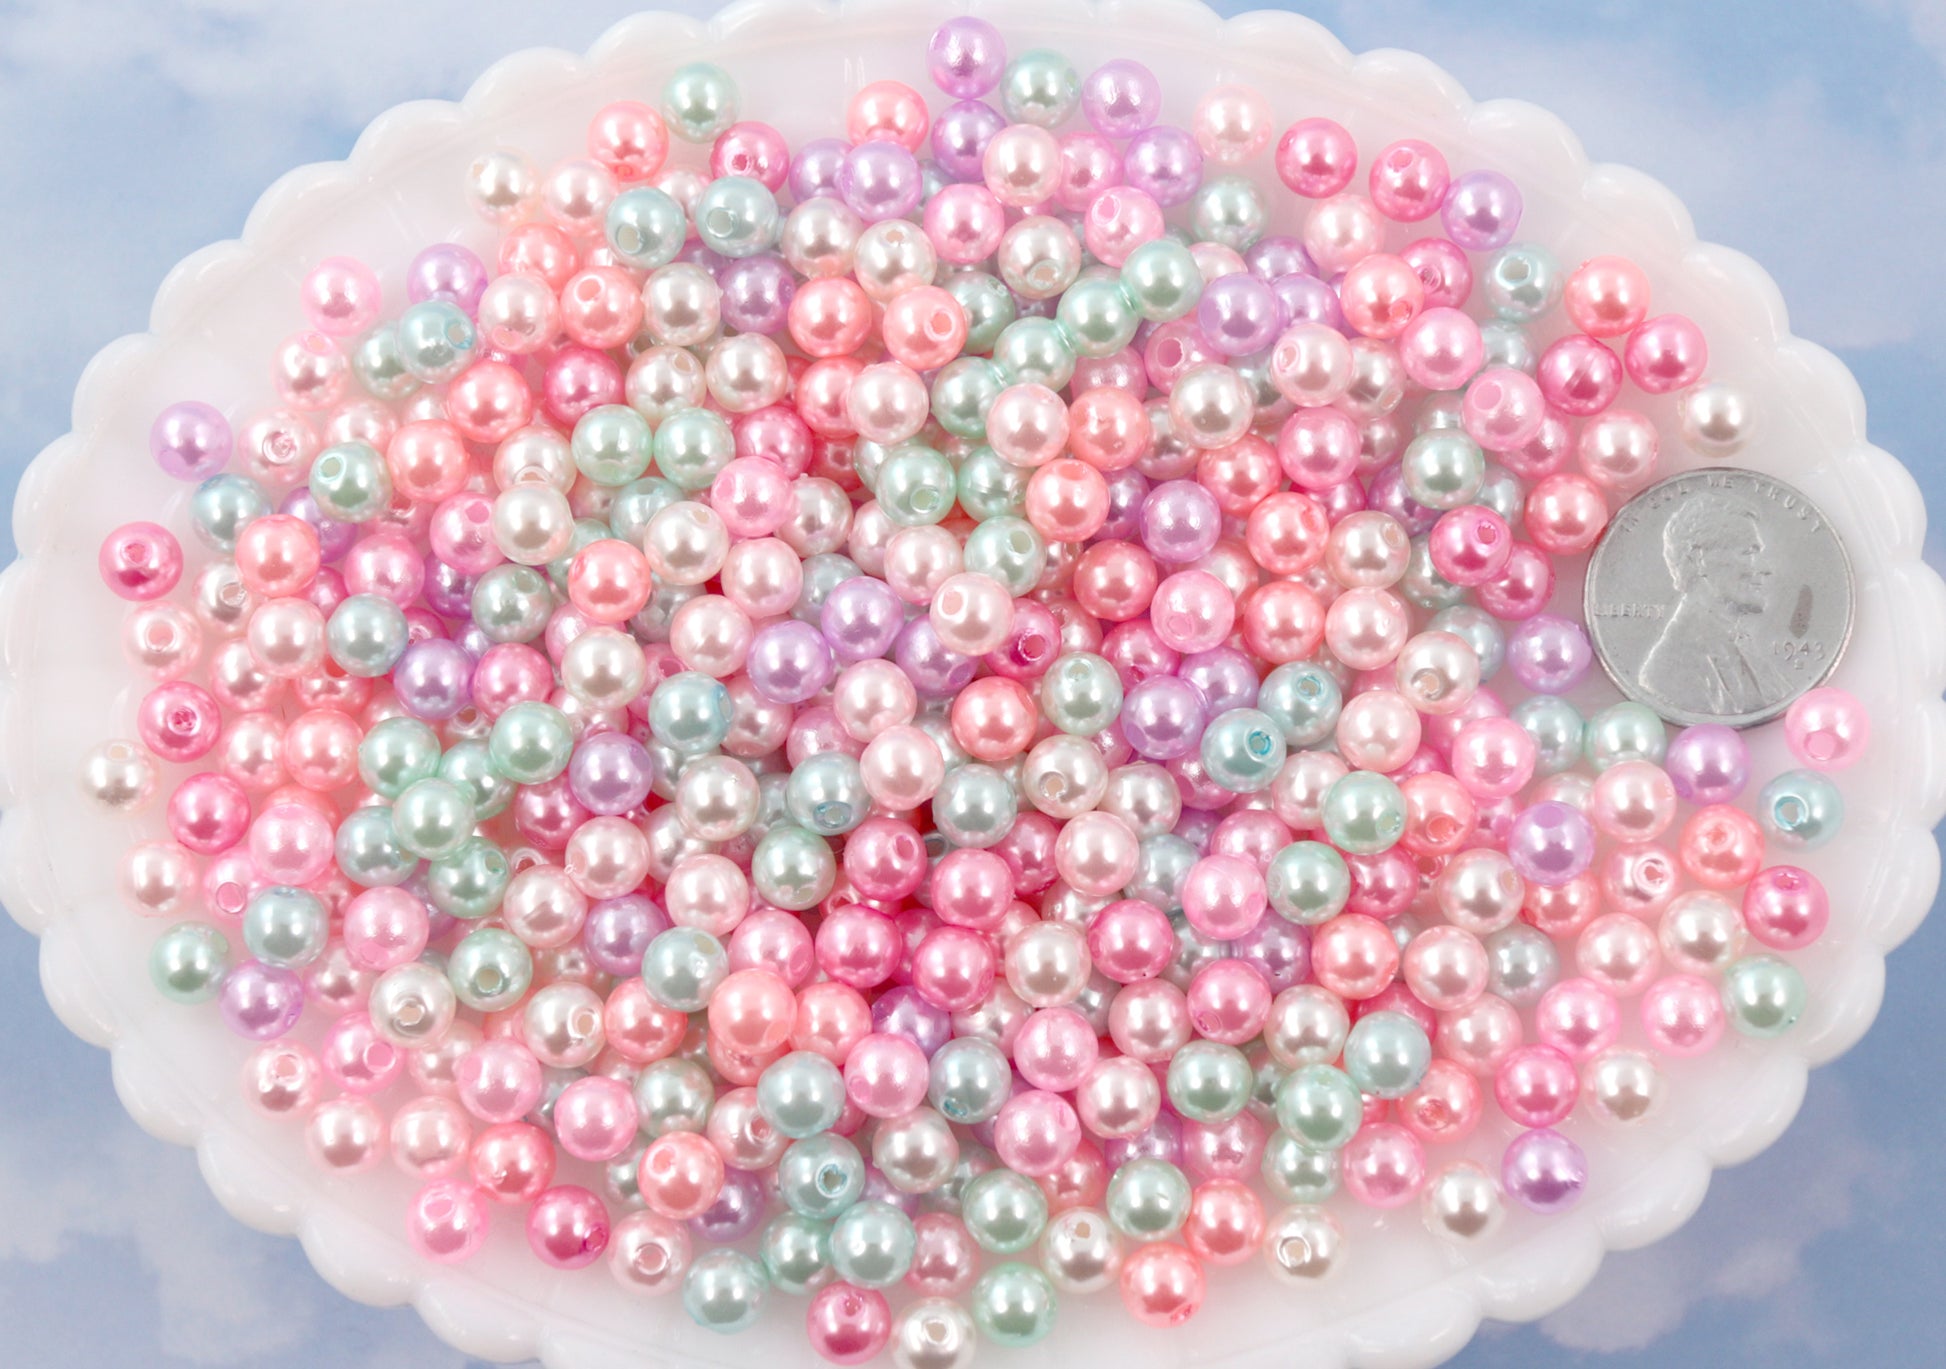 2,000 pcs Assorted Metallic Artificial Plastic Pearls 4mm Tiny Round Craft  Beads